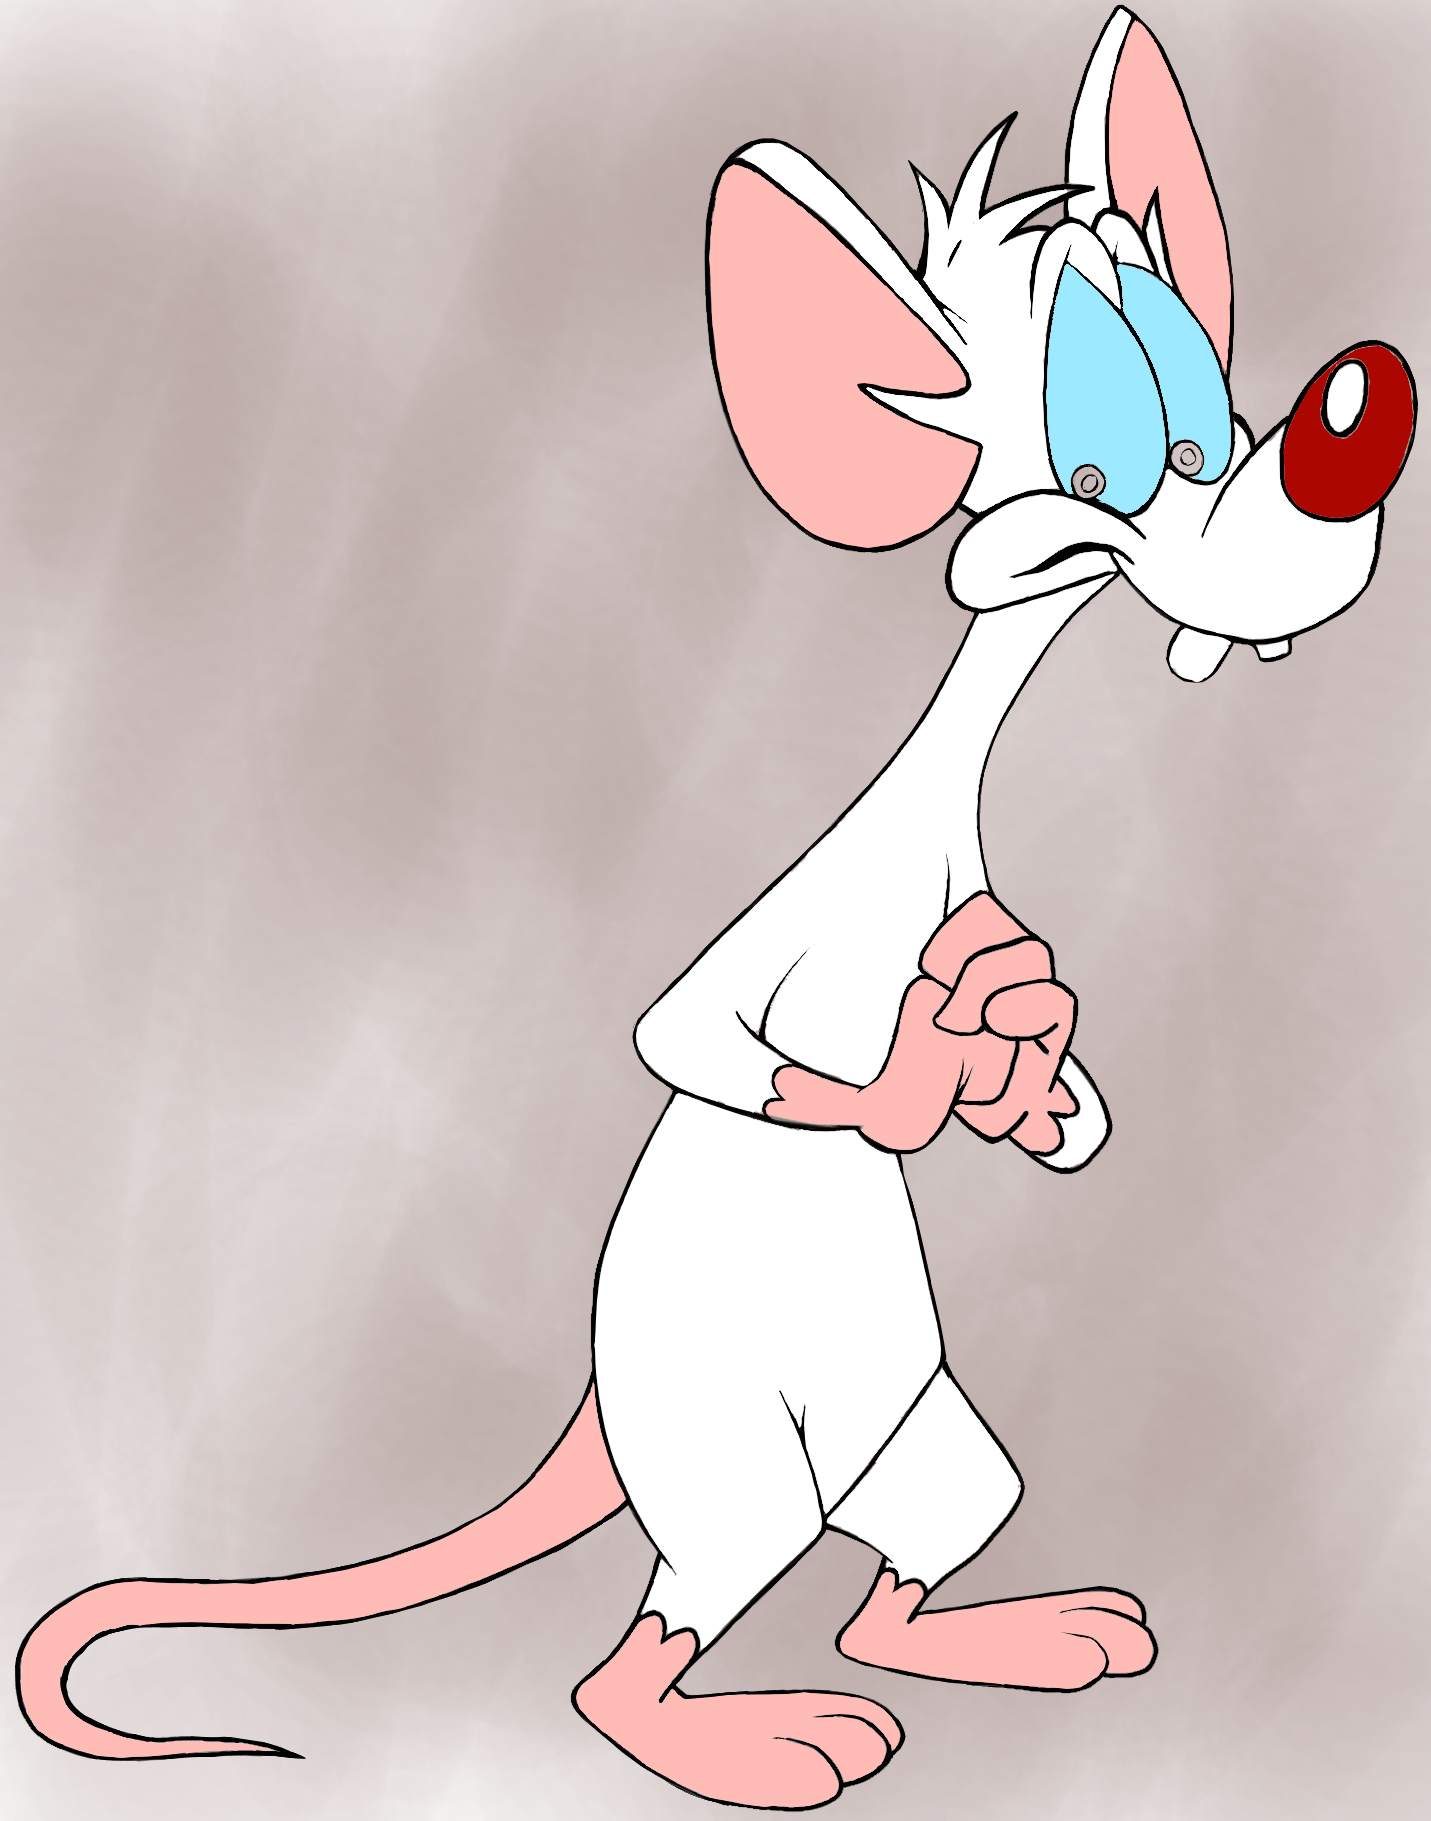 Pinky-And-The-Brain-Transparent-PNG 4.png